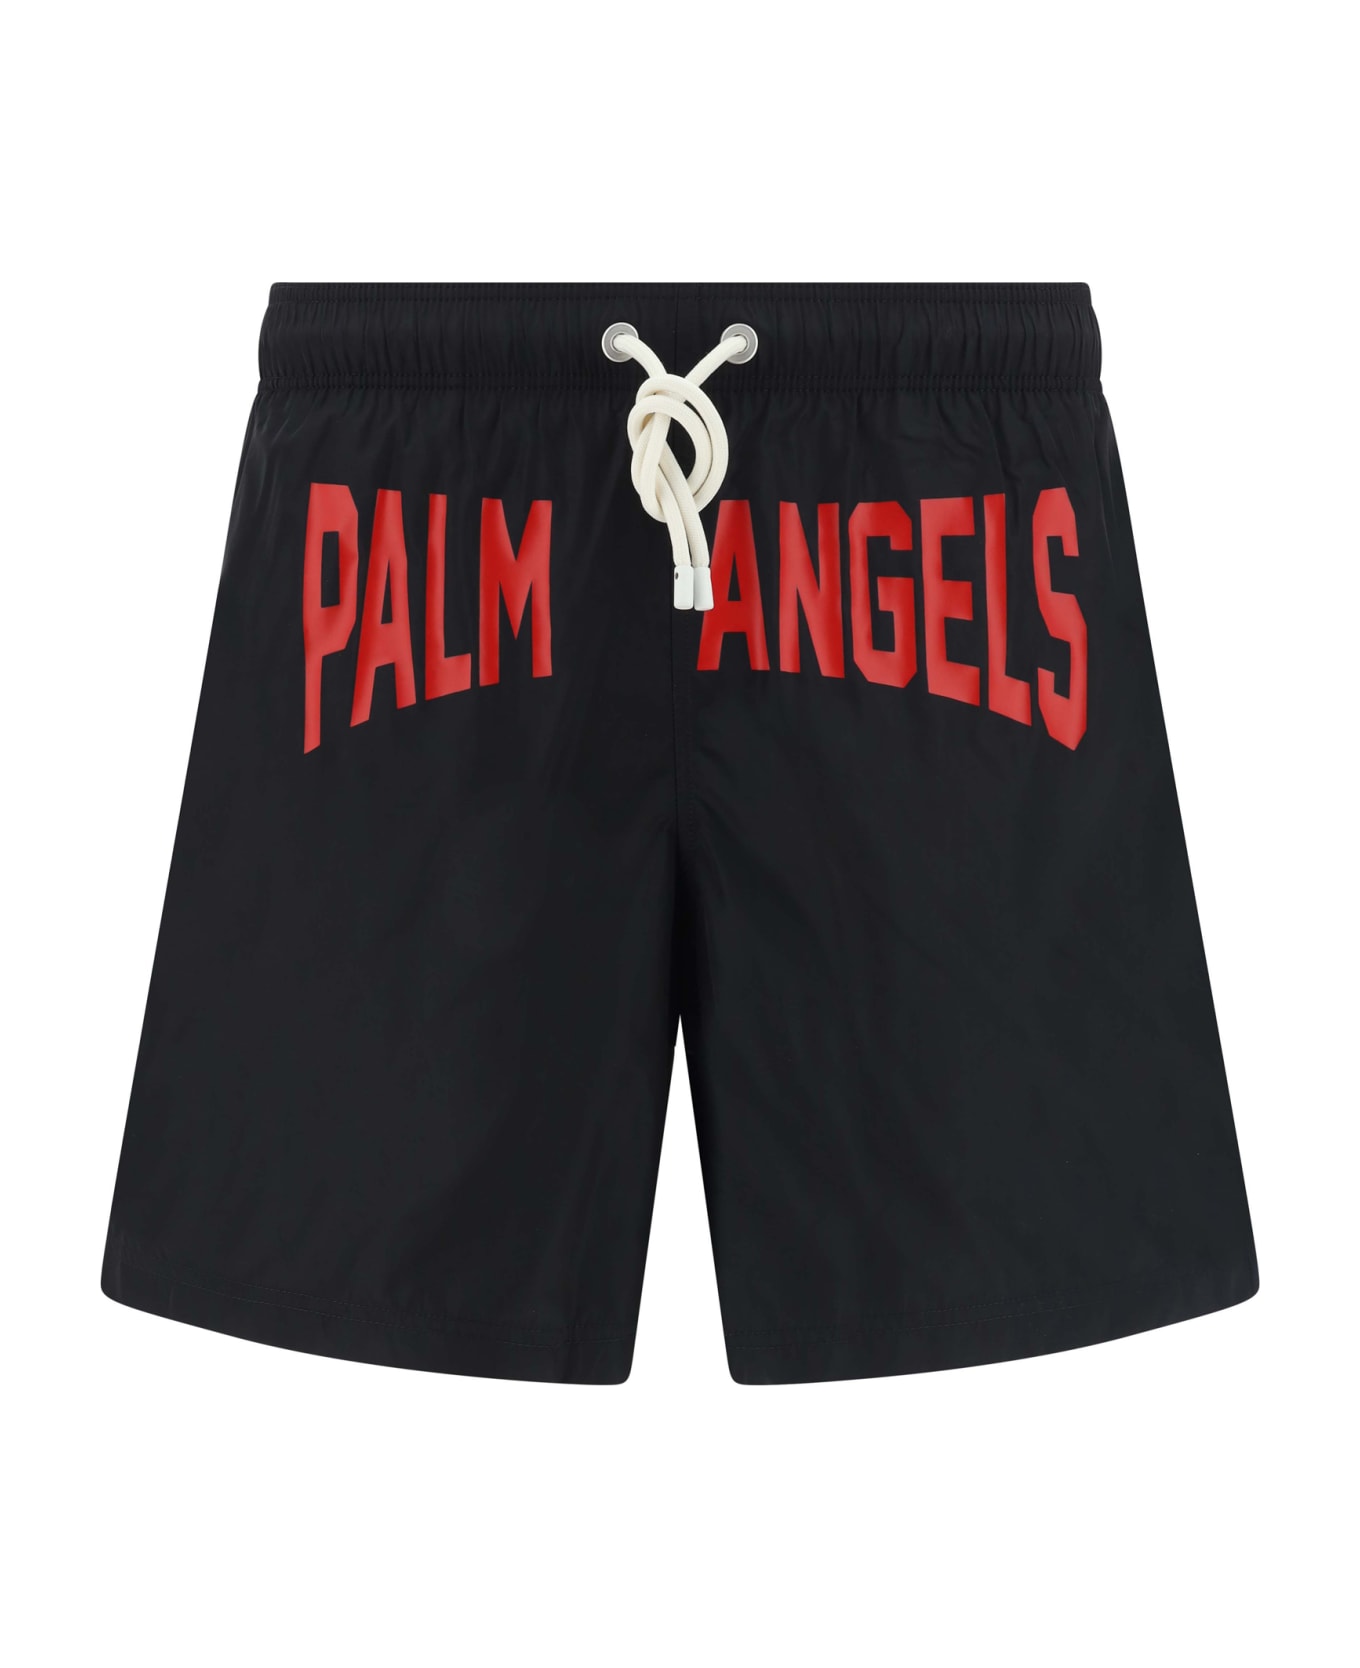 Palm Angels Swimsuit - Black/red